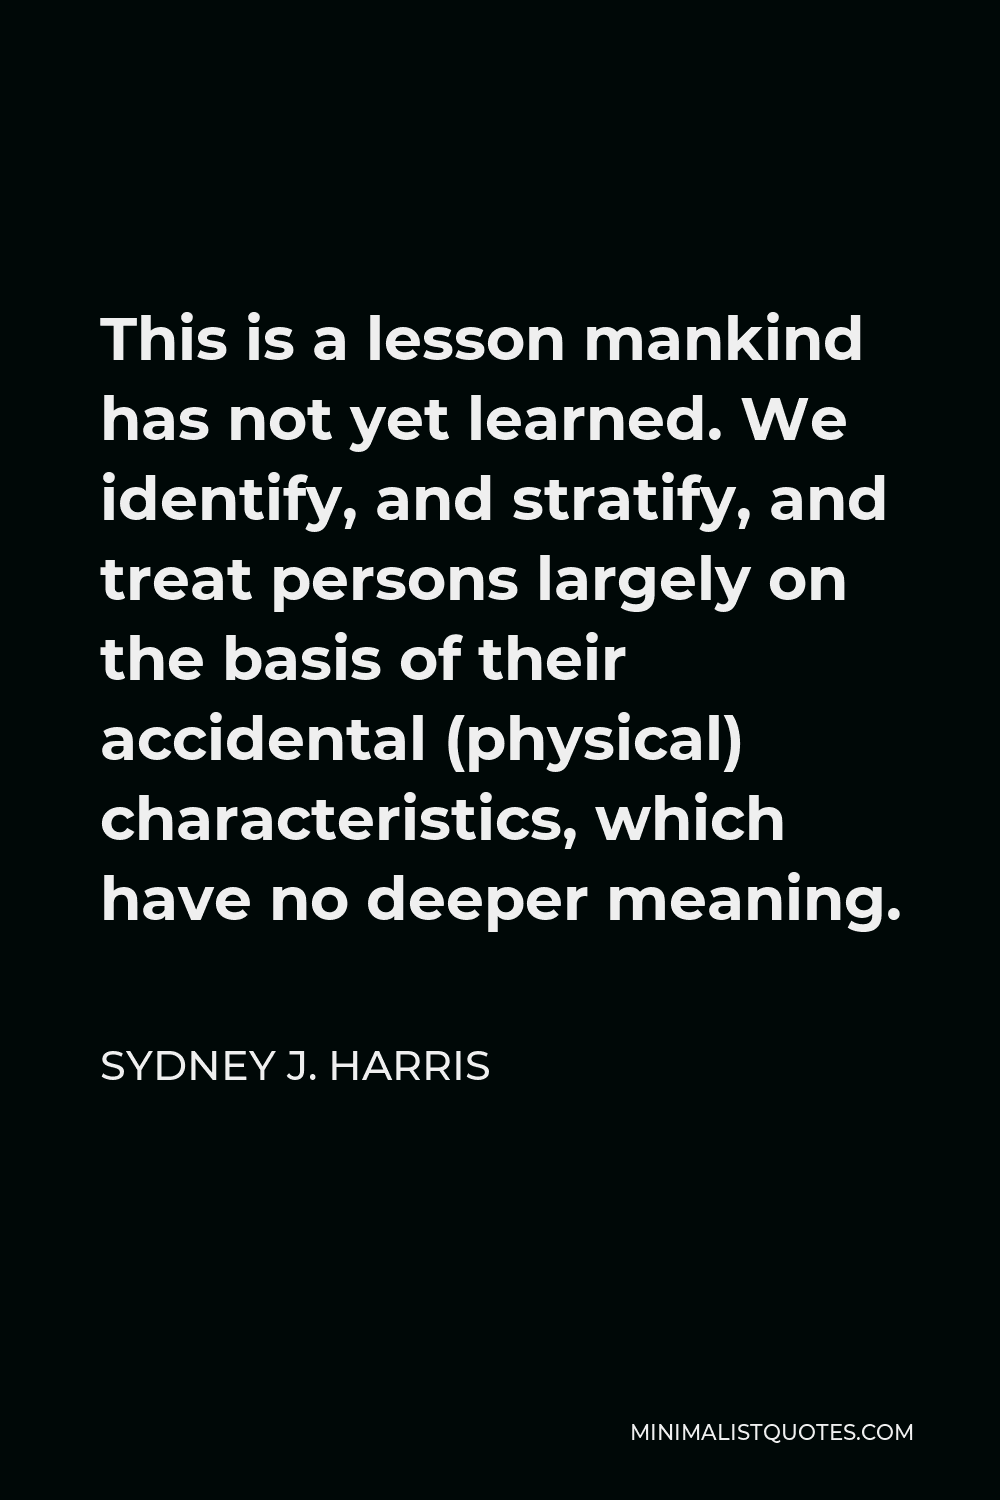 Sydney J. Harris Quote - This is a lesson mankind has not yet learned. We identify, and stratify, and treat persons largely on the basis of their accidental (physical) characteristics, which have no deeper meaning.